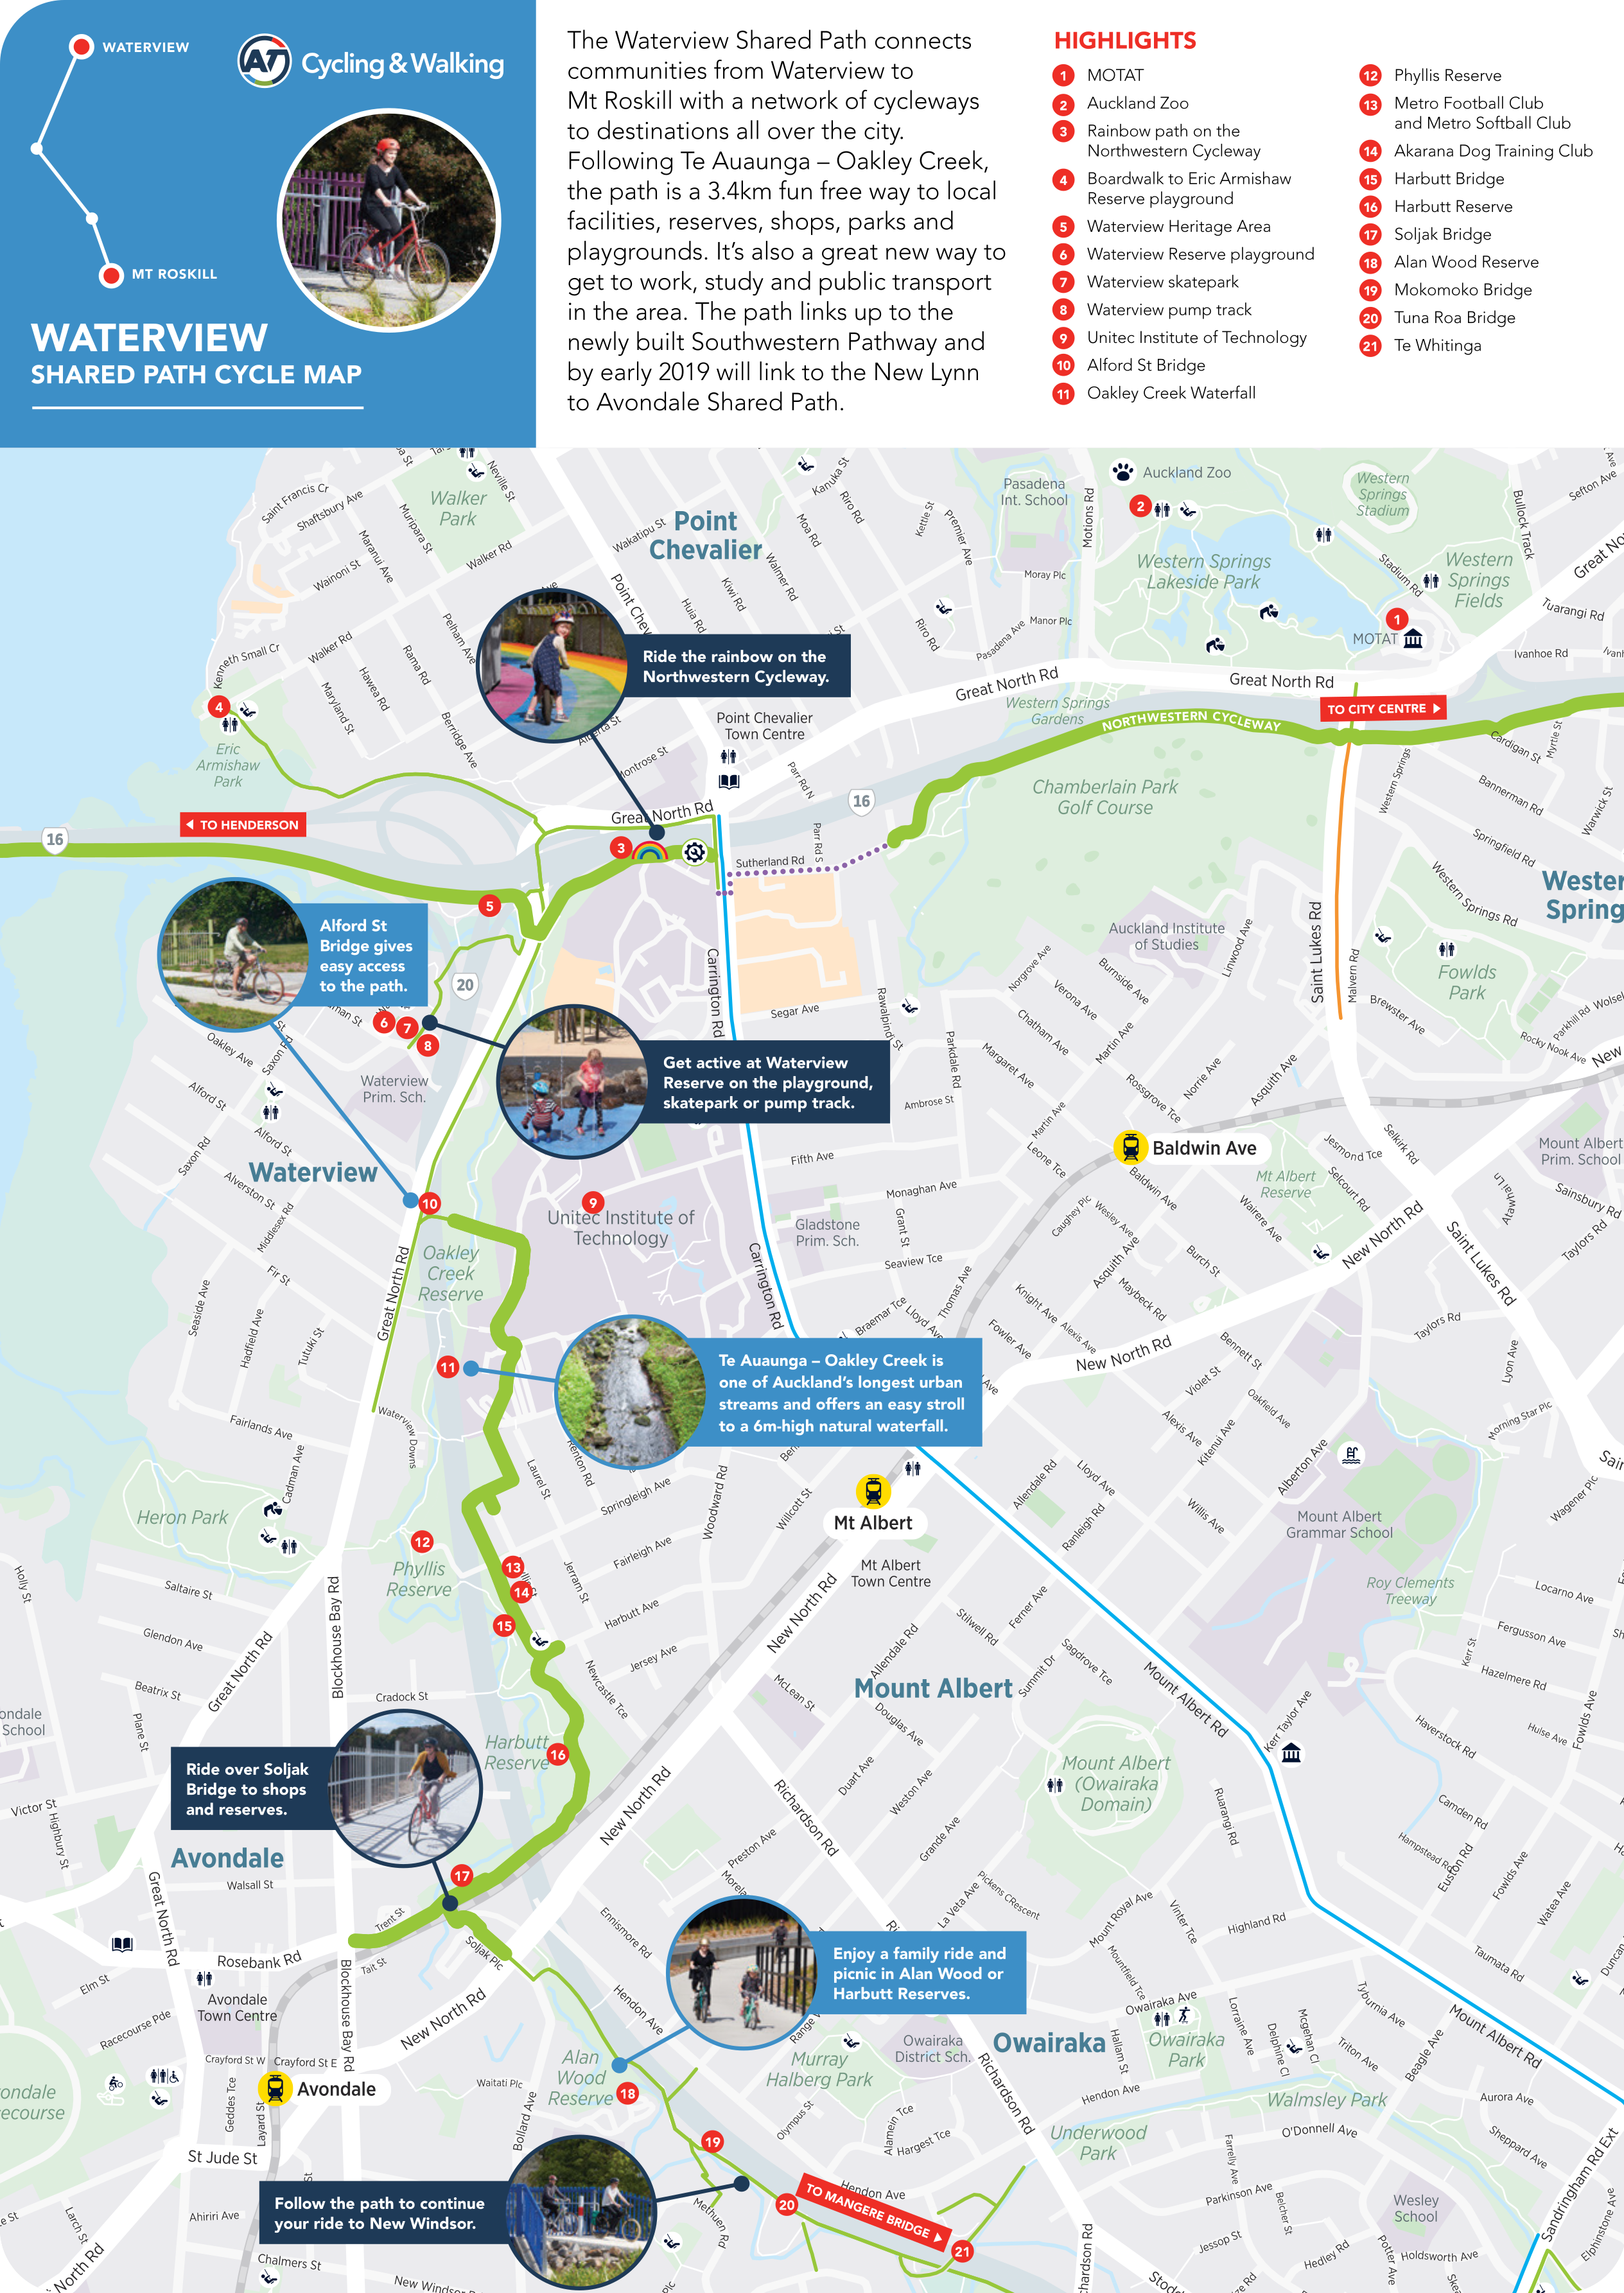 Waterview Shared Path Cycle Map from Auckland Transport circa 2017.

Text reads: 
The Waterview Shared Path connects communities from Waterview to Mt Roskill with a network of cycleways to destinations all over the city. Following Te Auaunga Oakley Creek, the path is a 3.4km fun, free way to local facilities, reserves, shops, parks, and playgrounds. It's also a great new way to get to work, study, and public transport in the area. The path links up to the newly built Southwestern Pathway and by early 2019 will link to the New Lynn to Avondale Shared Path. 

There are locations of note which have supplementary text, as follows:

Ride the rainbow on the Northwestern Cycleway. 

Alford St Bridge gives easy access to the path. 

Get active at Waterview Reserve on the playground, skatepark, or pump track. 

Te Auaunga Oakley Creek is one of Auckland's longest urban streams and offers an easy stroll to a 6m high natural waterfall. 

Ride over Soljak Bridge to shops and reserves. 

Enjoy a family ride and picnic in Alan Wood or Harbutt Reserves

Follow the path to continue your ride to New Windsor.